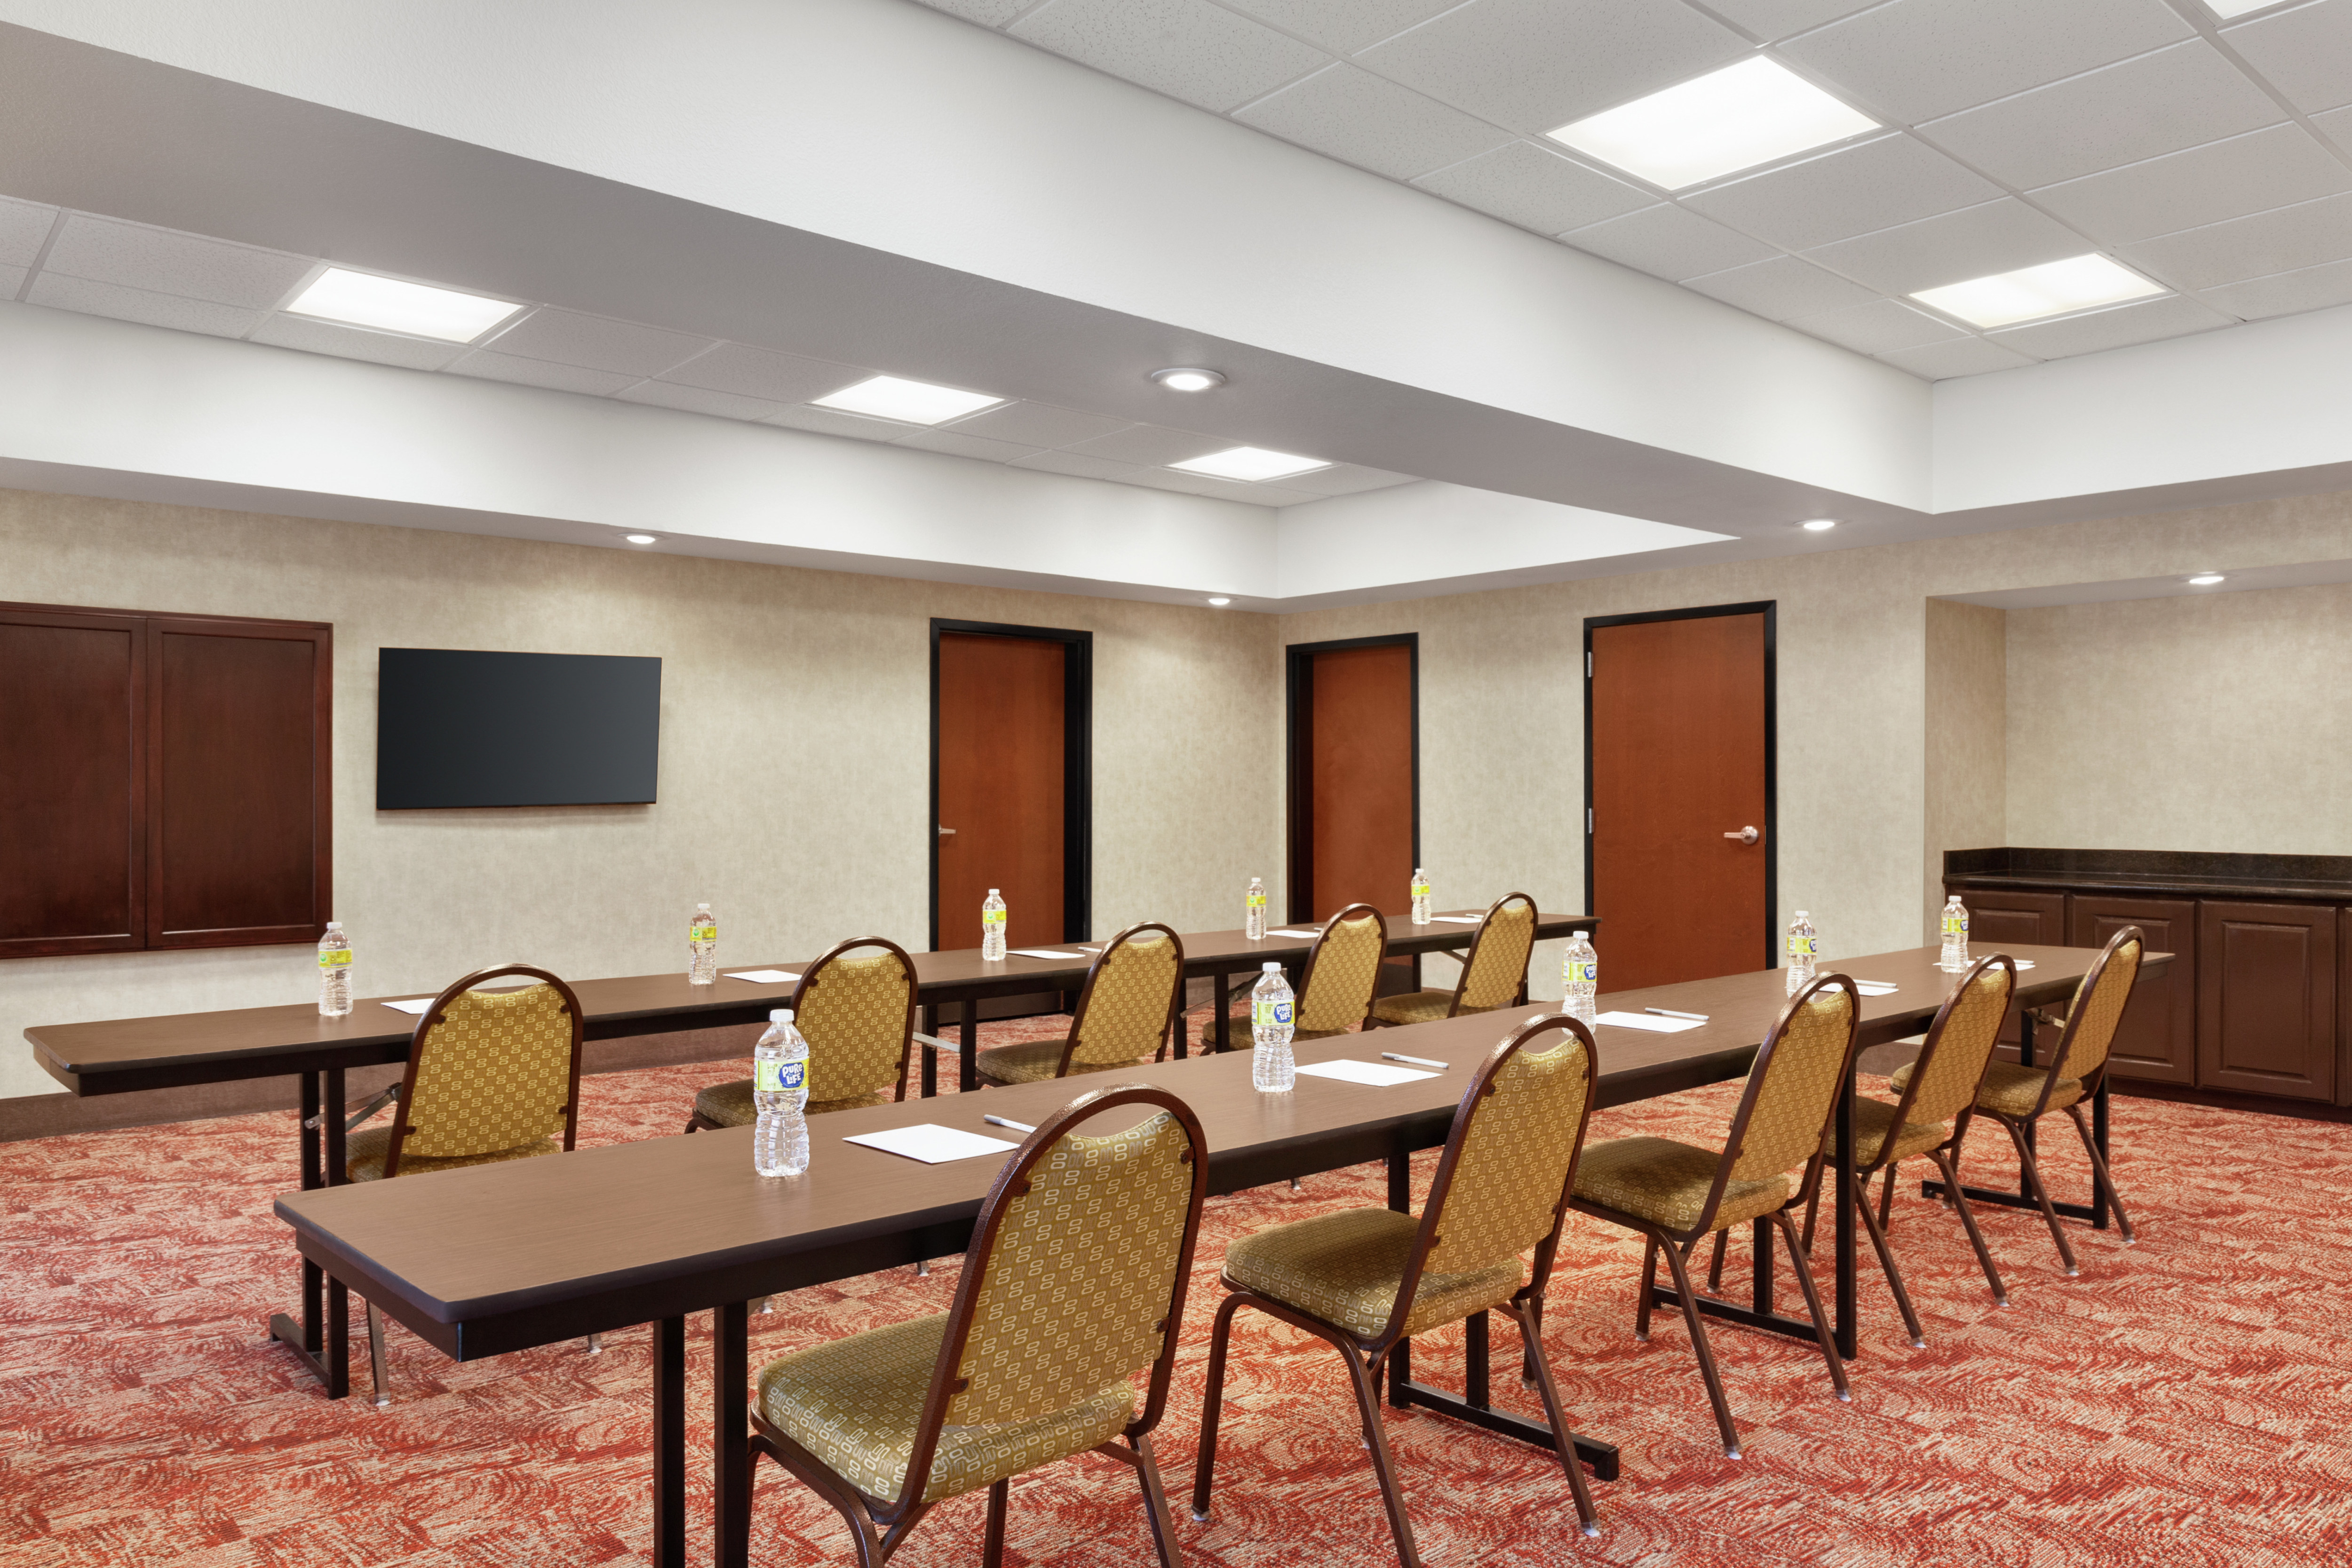 Spacious on-site meeting room featuring classroom style setup with TV at front of room.